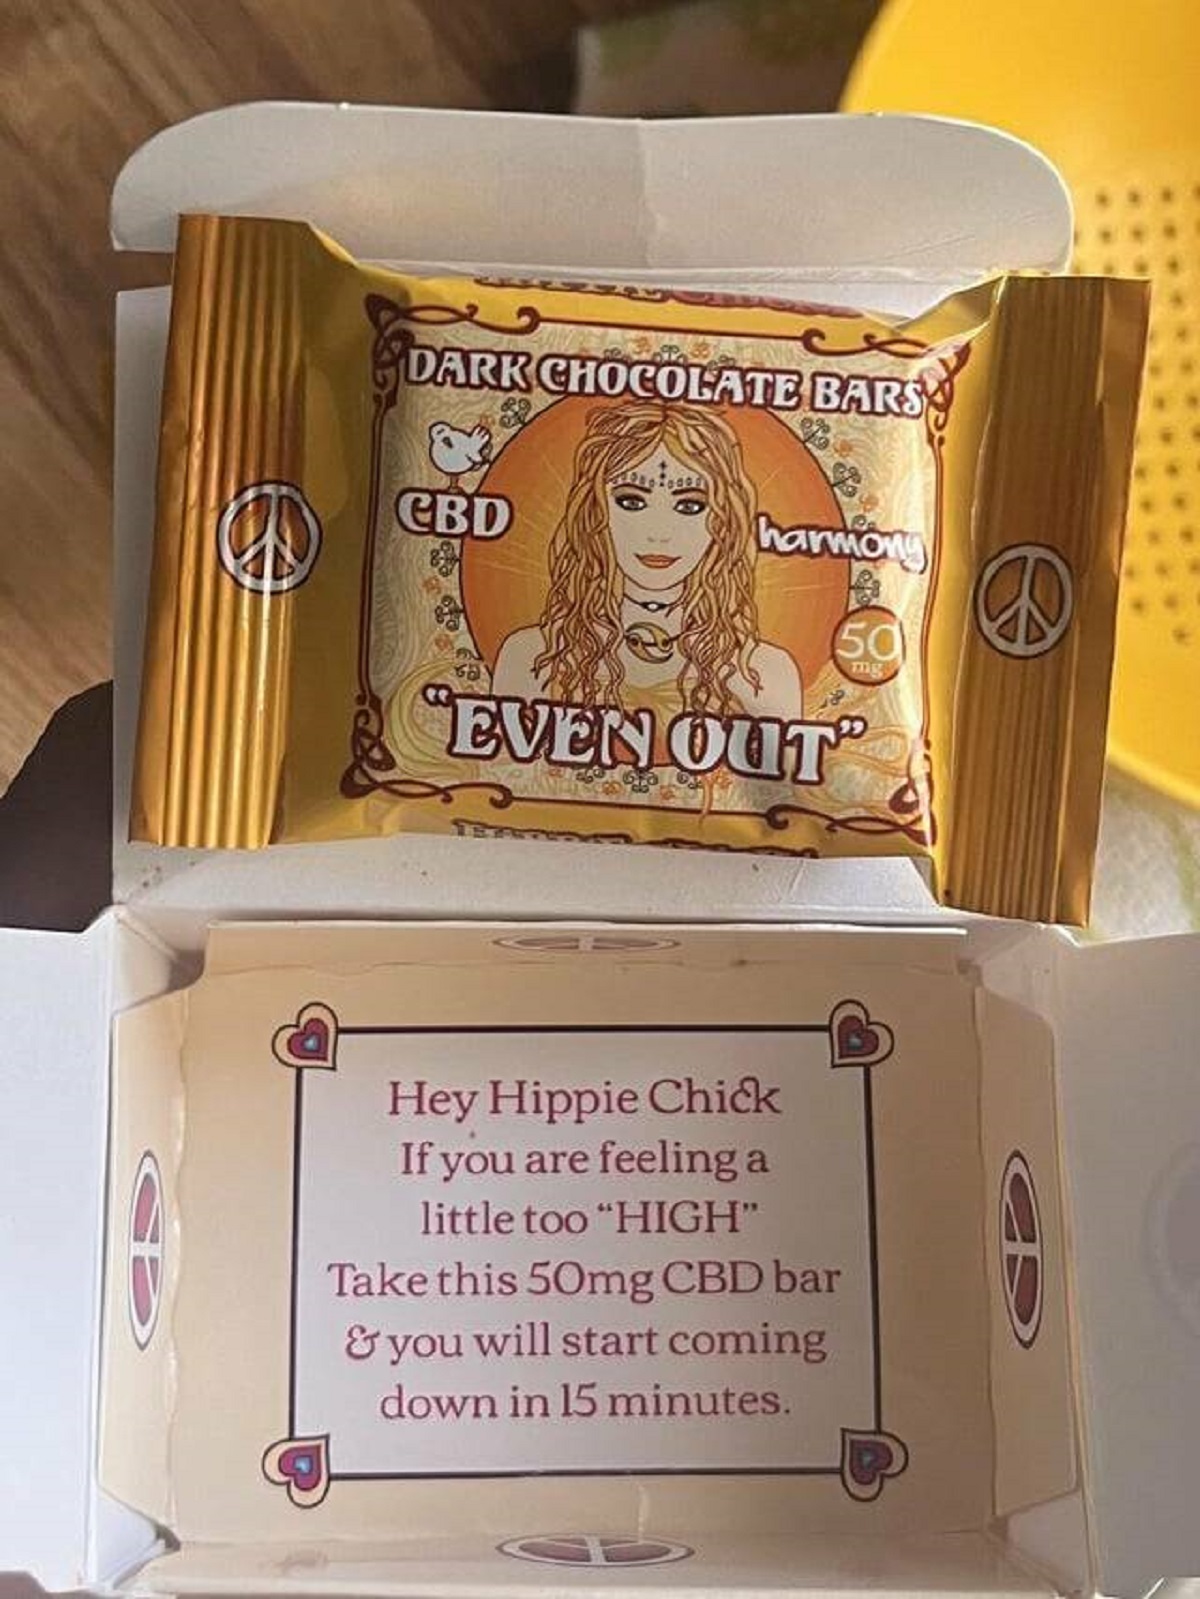 "My edibles came with a CBD bar in case you get too high"